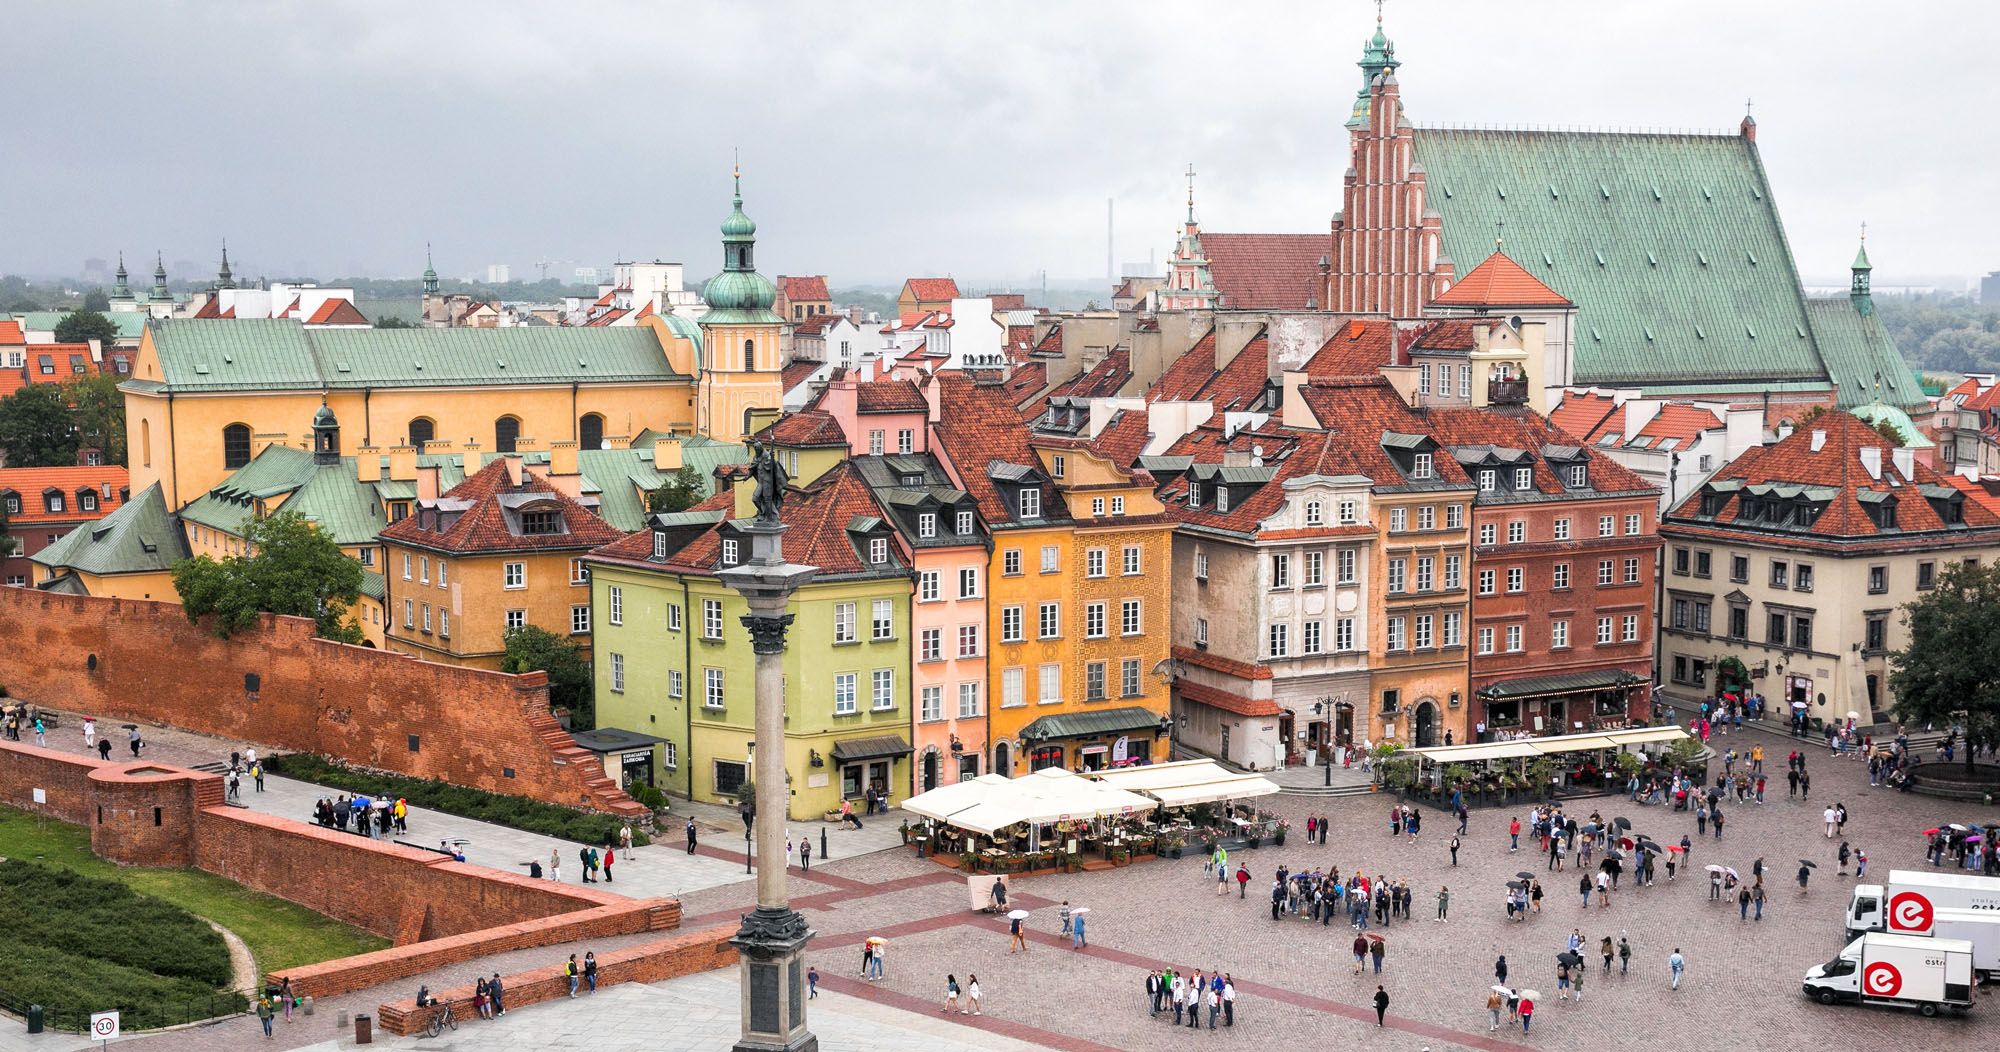 Featured image for “15 Best Things to Do in Warsaw, Poland”